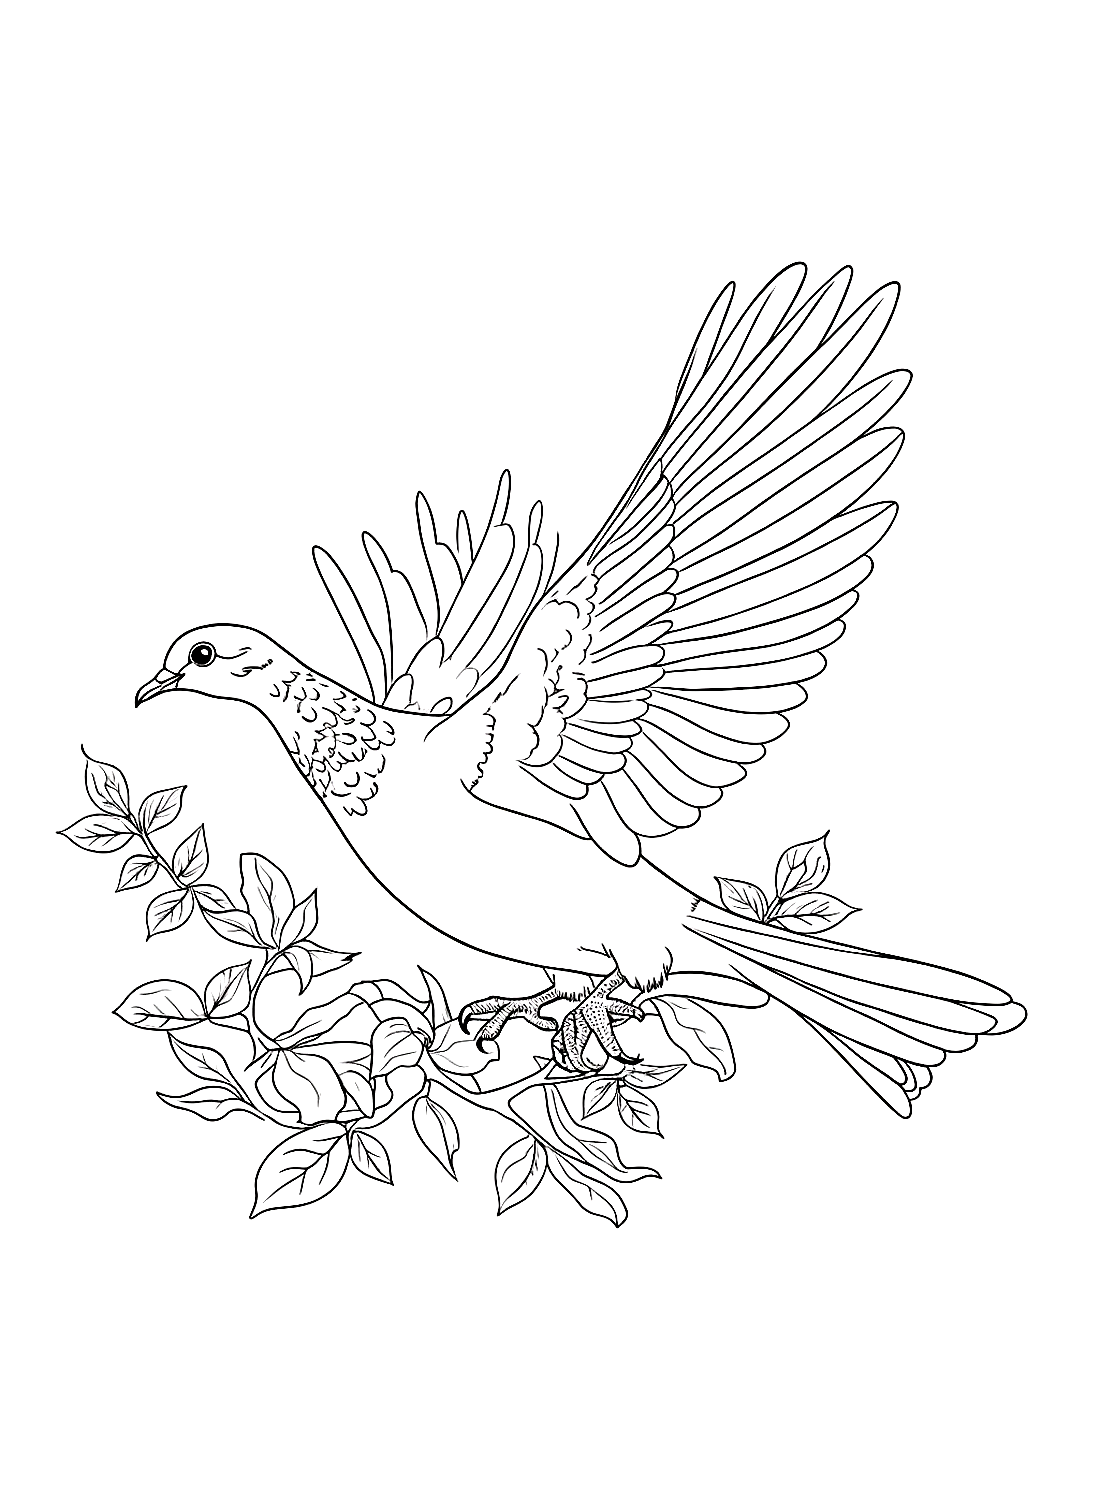 A dove flying in sky from Doves